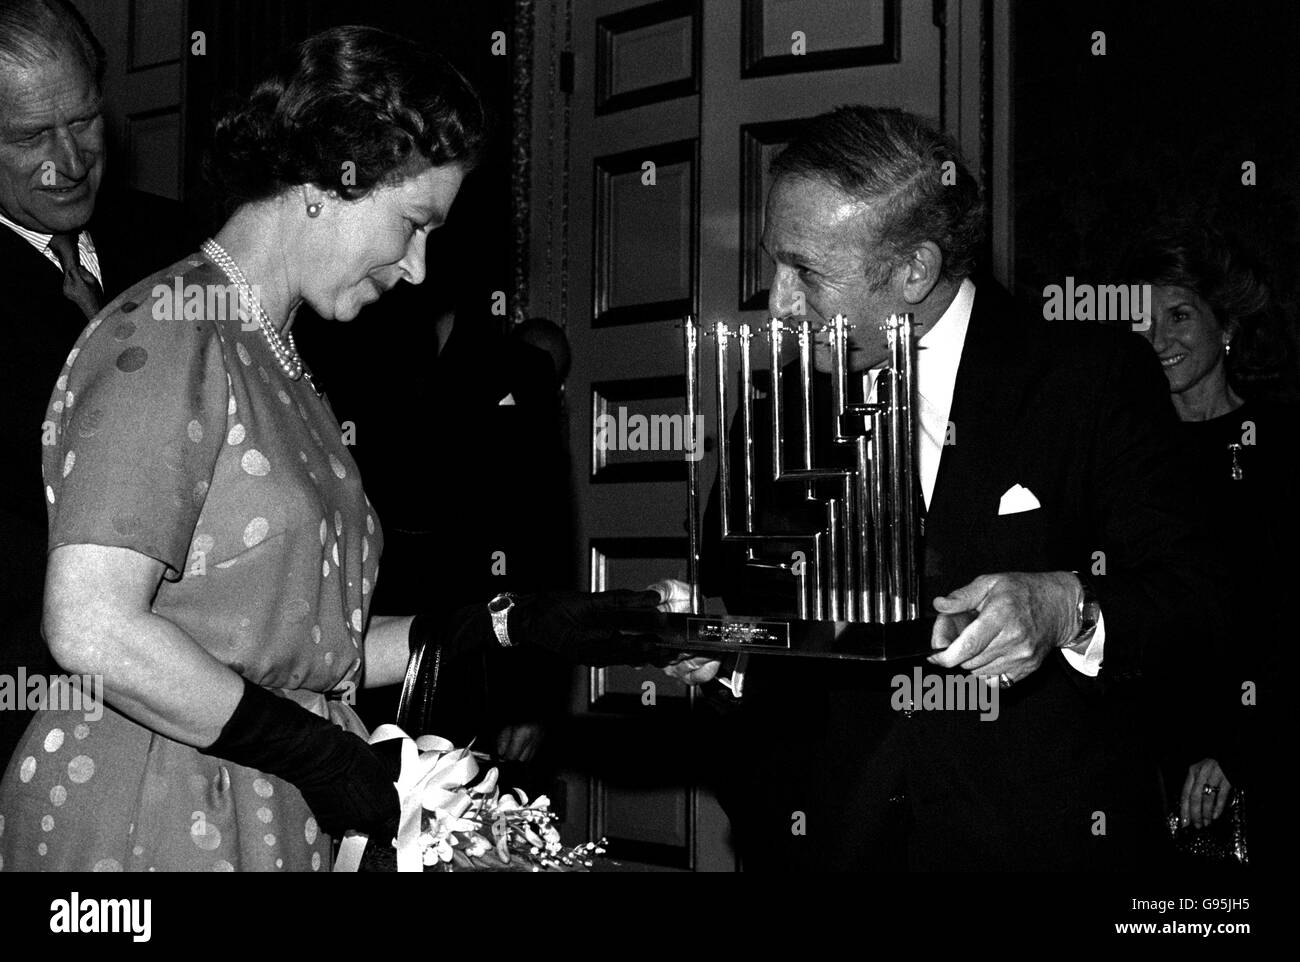 Greville Janner, Labour MP for Leicester and President of the Board of Deputies of British Jews, presenting the Queen with a menorah, a ceremonial lamp. Stock Photo